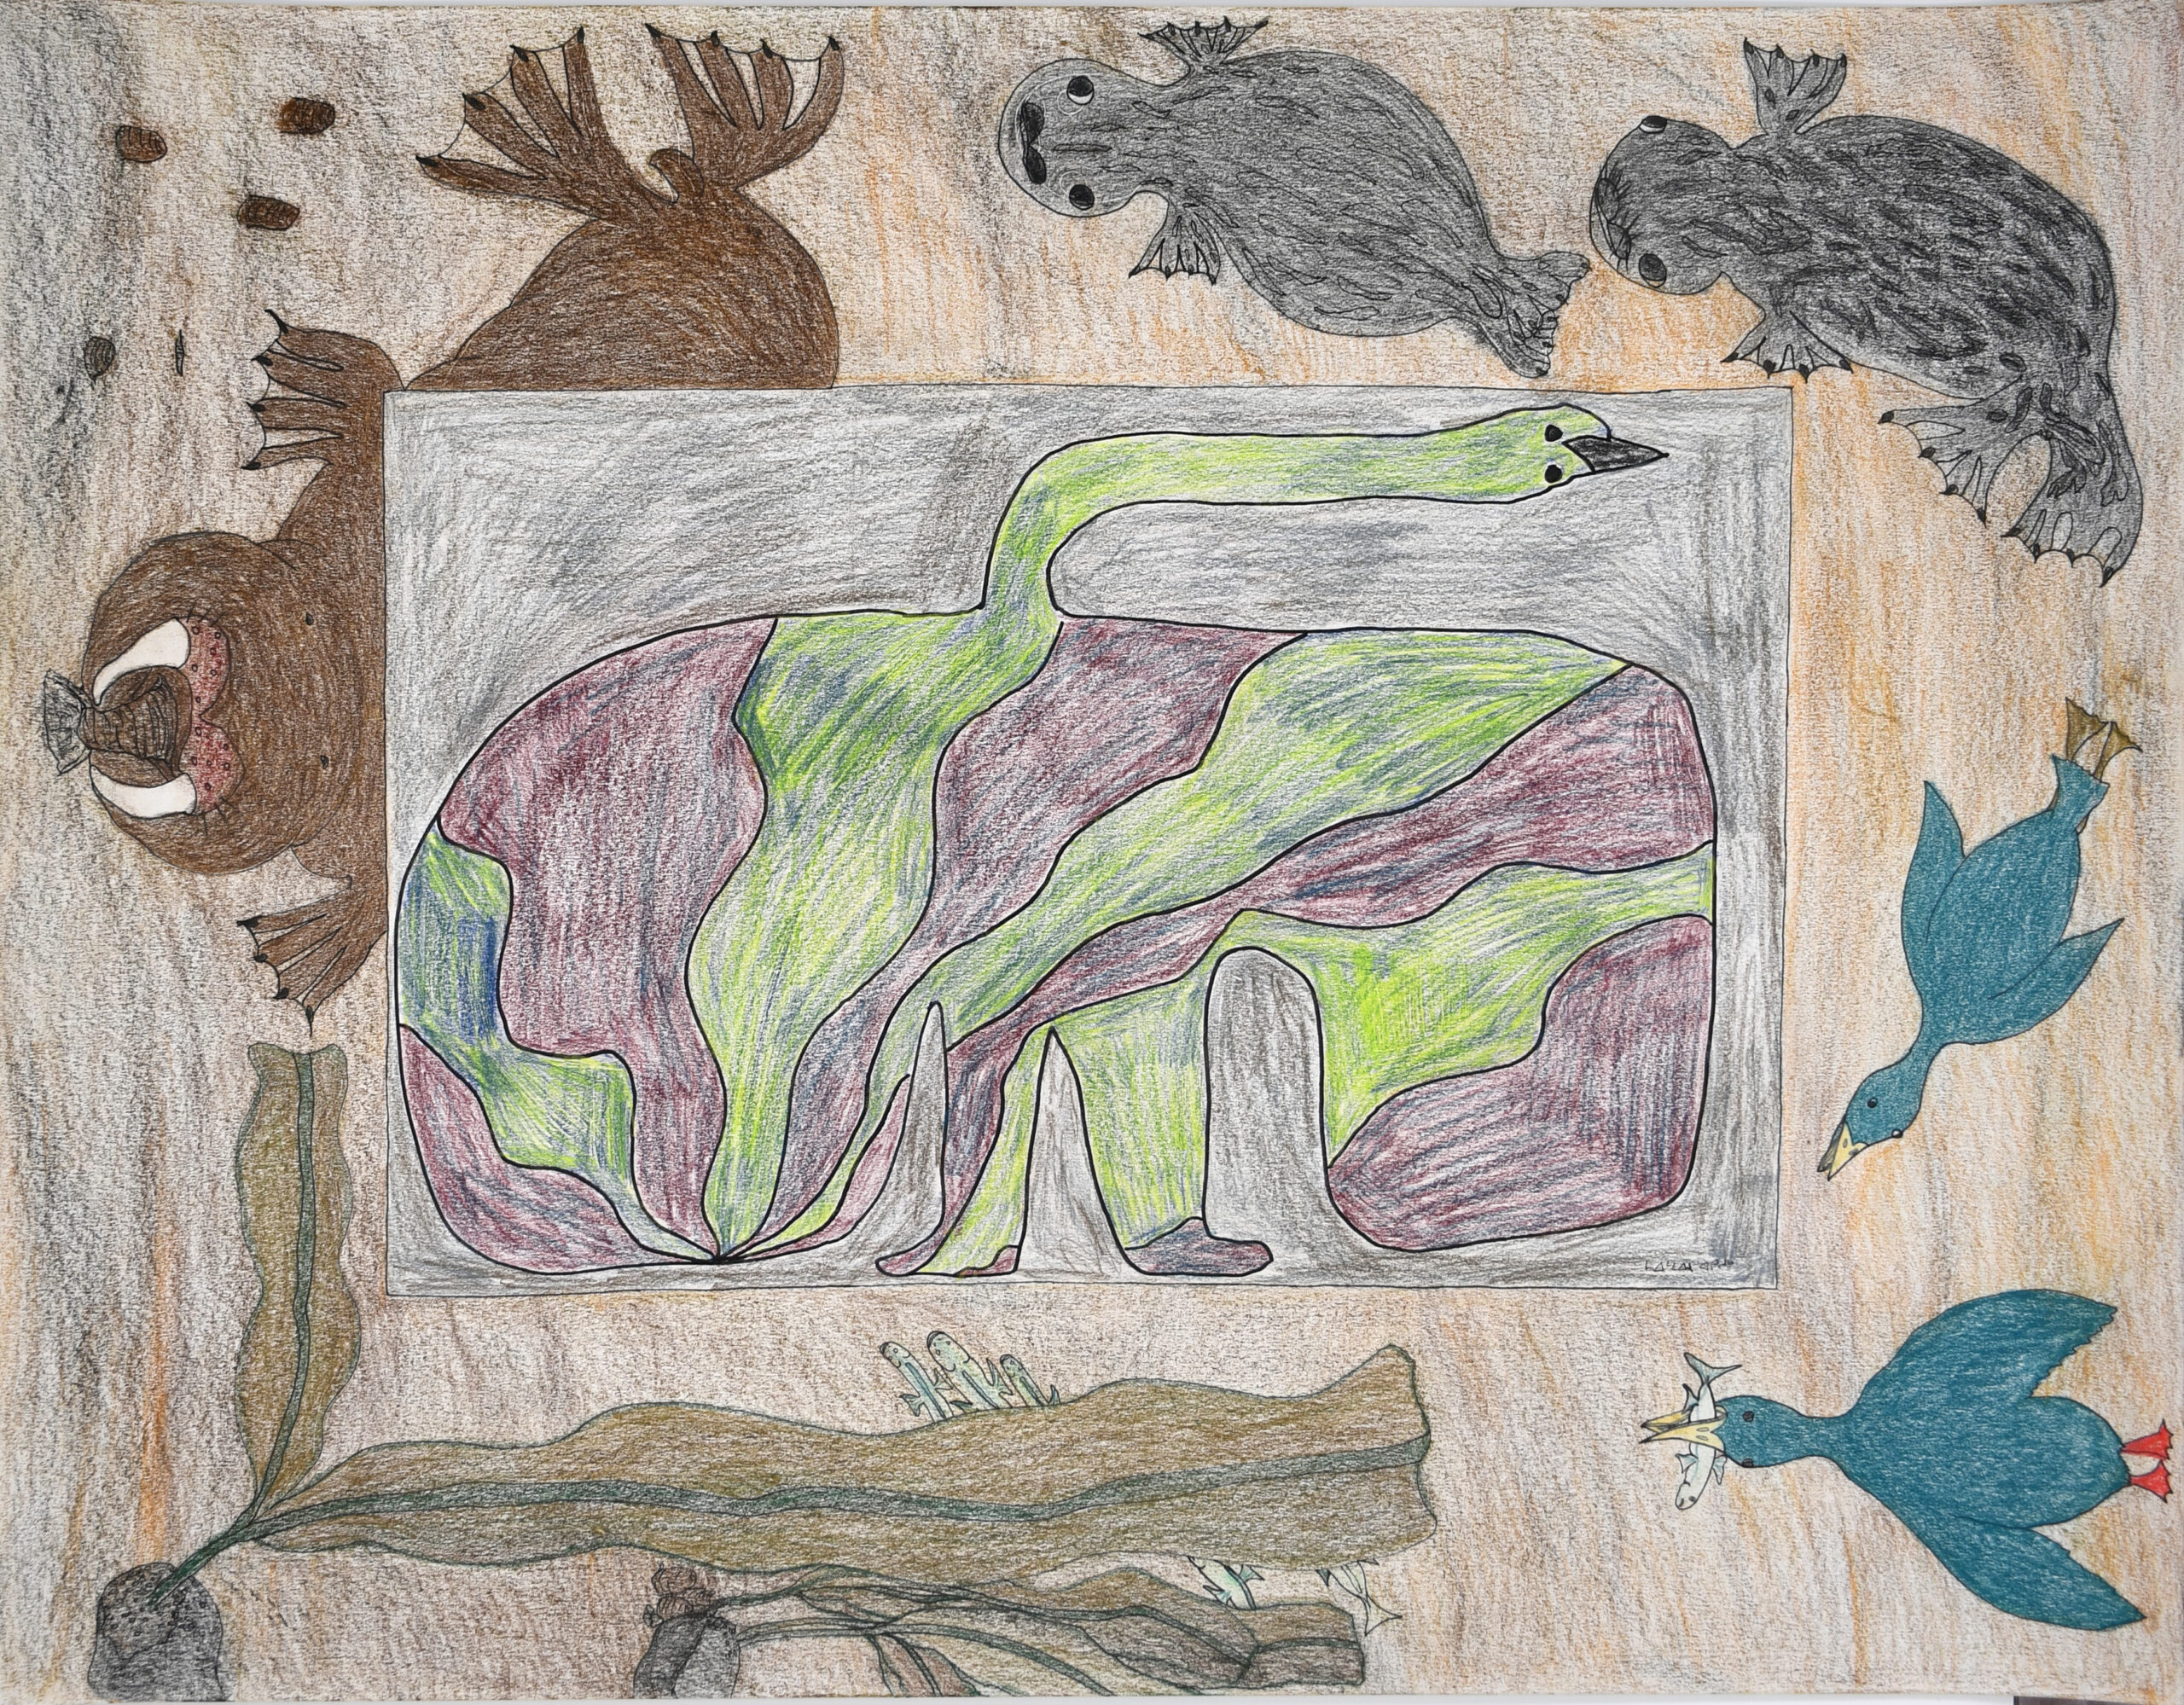 Inuit Artists Collaboration Drawings - Dorset Fine Arts